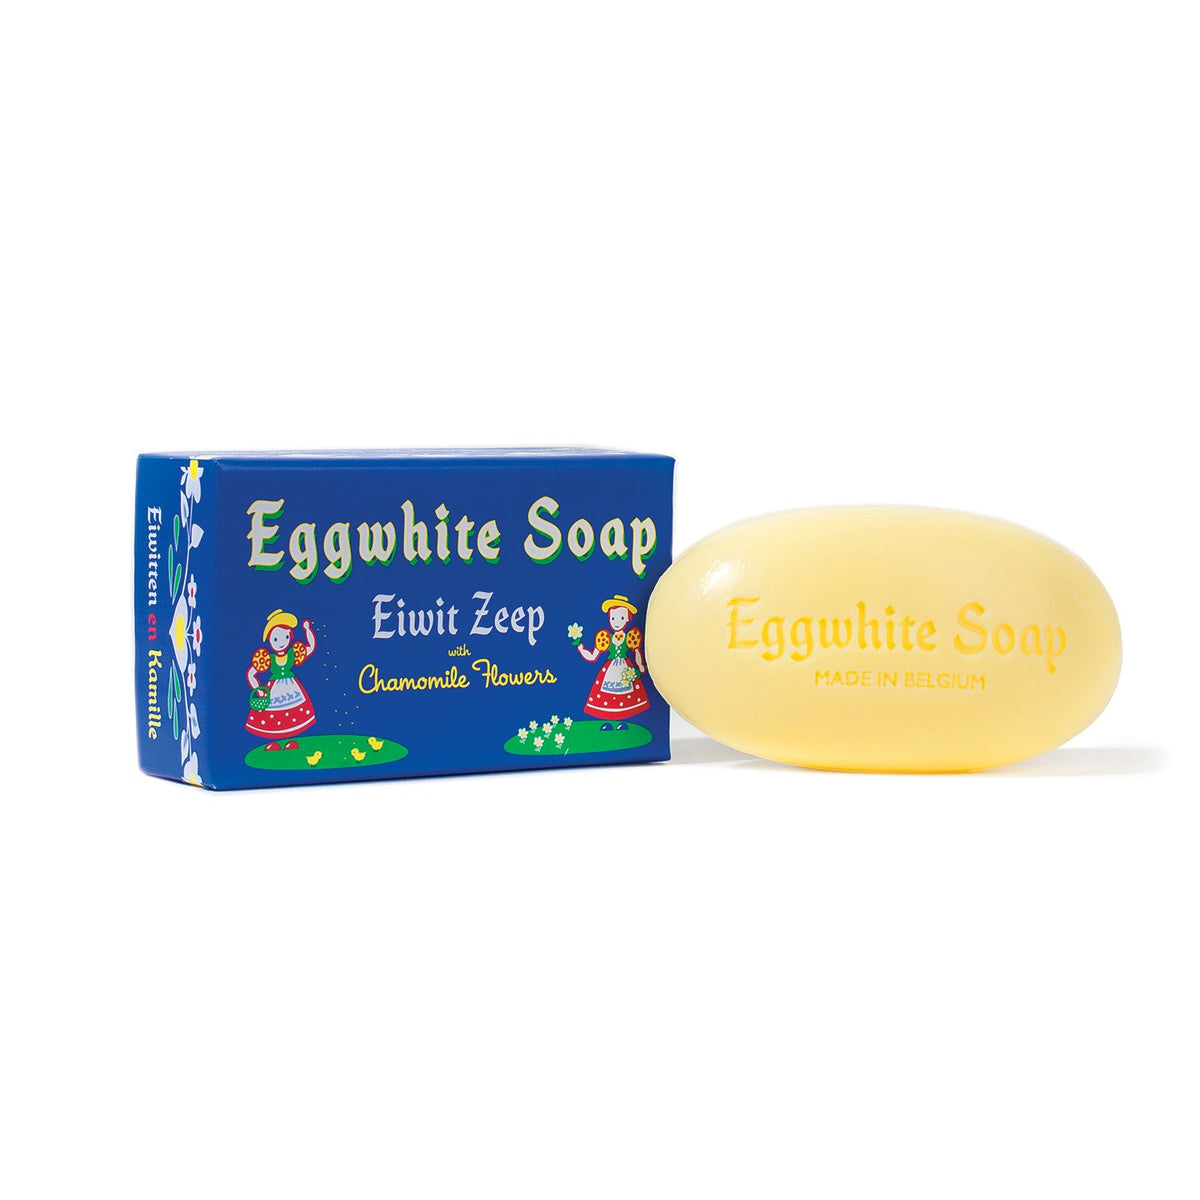 A bar of Eggwhite Facial Single Soap - Belgium is displayed in front of its packaging. The soap, a light yellow color with "Eggwhite Soap - Made in Belgium" inscribed, boasts soothing chamomile. The blue box features the text "Eggwhite Facial Single Soap - Belgium - Eiwit Zeep - Chamomile Flowers" and colorful illustrations, epitomizing Belgian beauty bars from Soaps, Soaks & Pampering Products From Around the World.